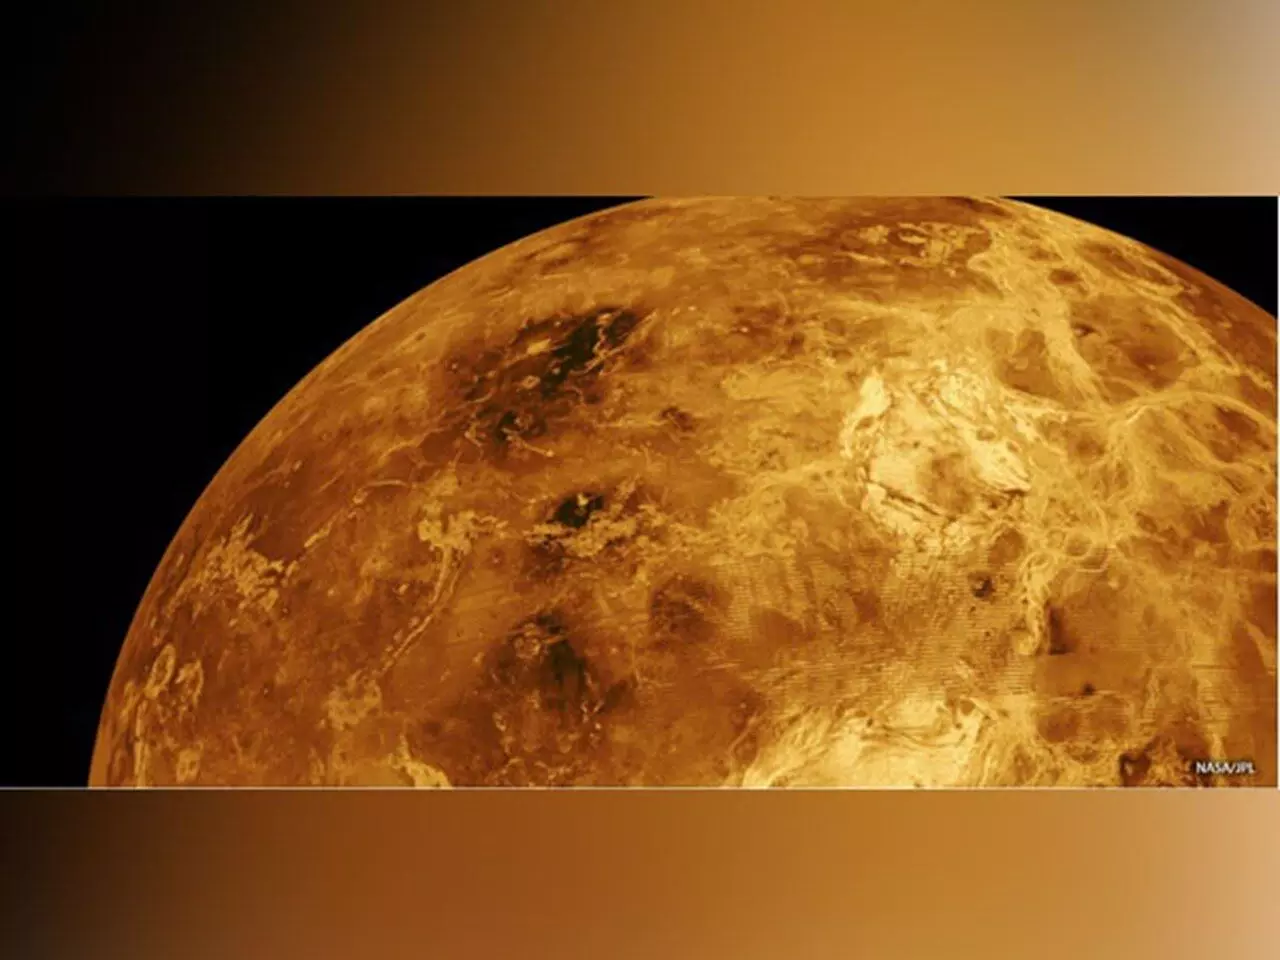 Images of 1991 Venus volcanic activity being examined now: Study